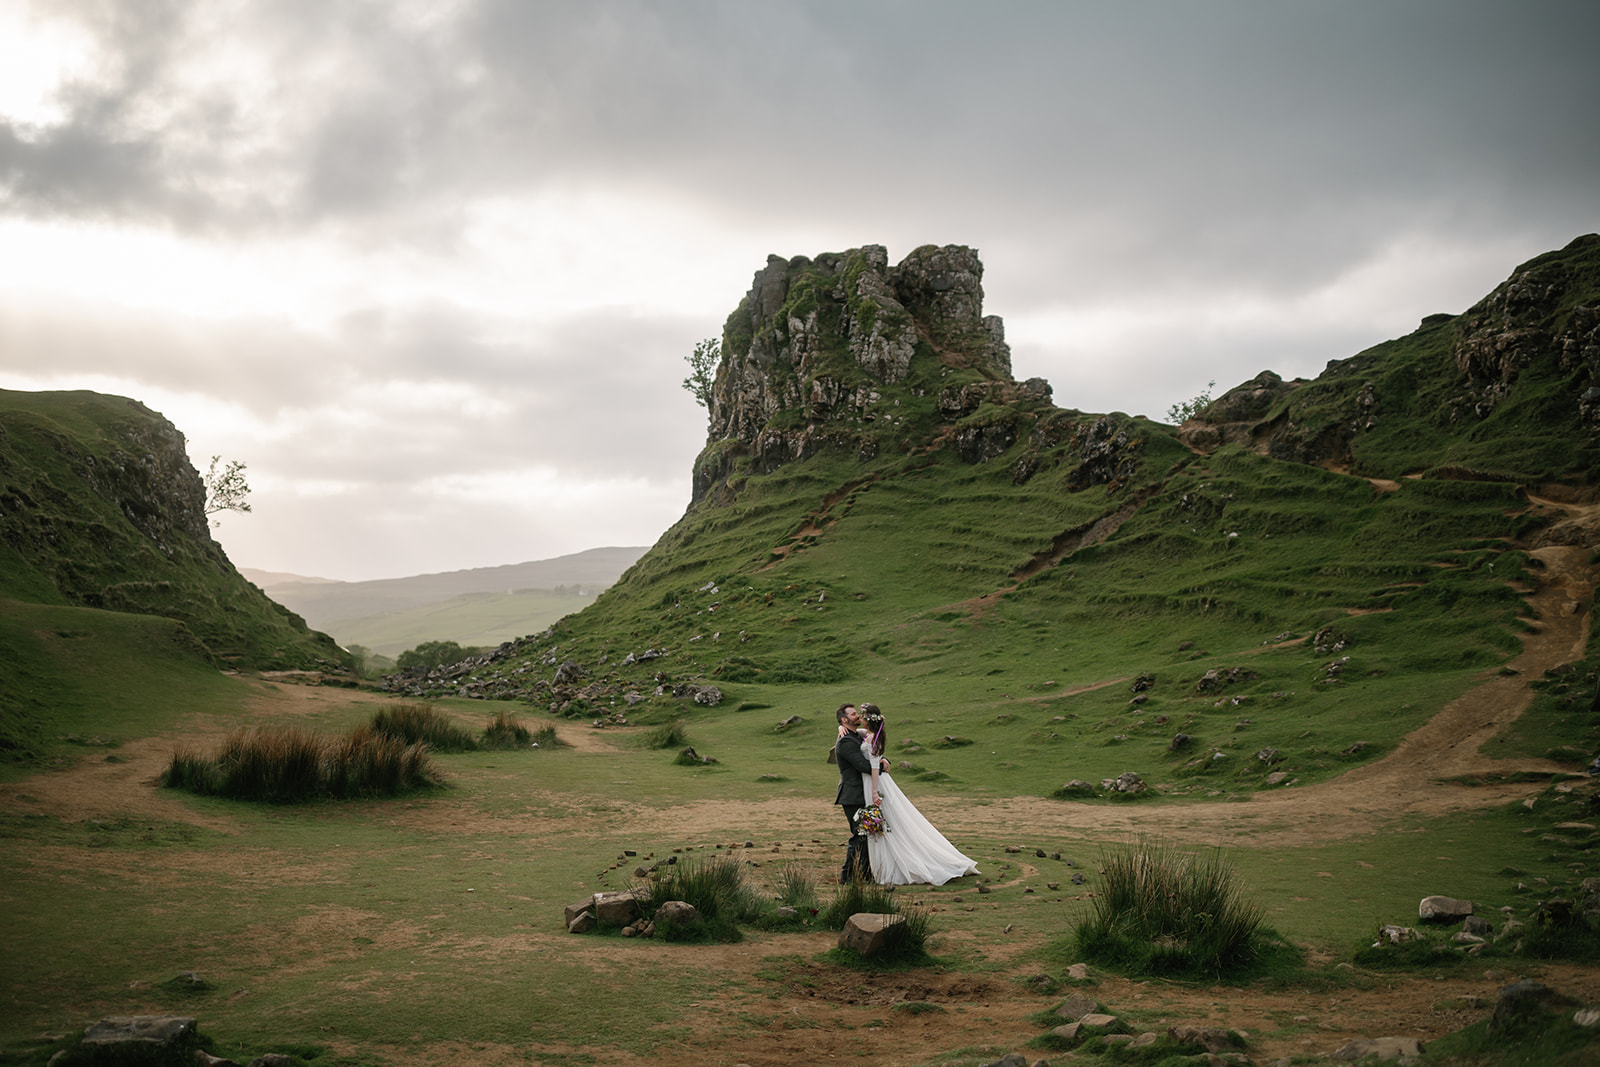 Nick and Becca's love story comes to life in the magical setting of Fairy Glen, creating timeless elopement photos 